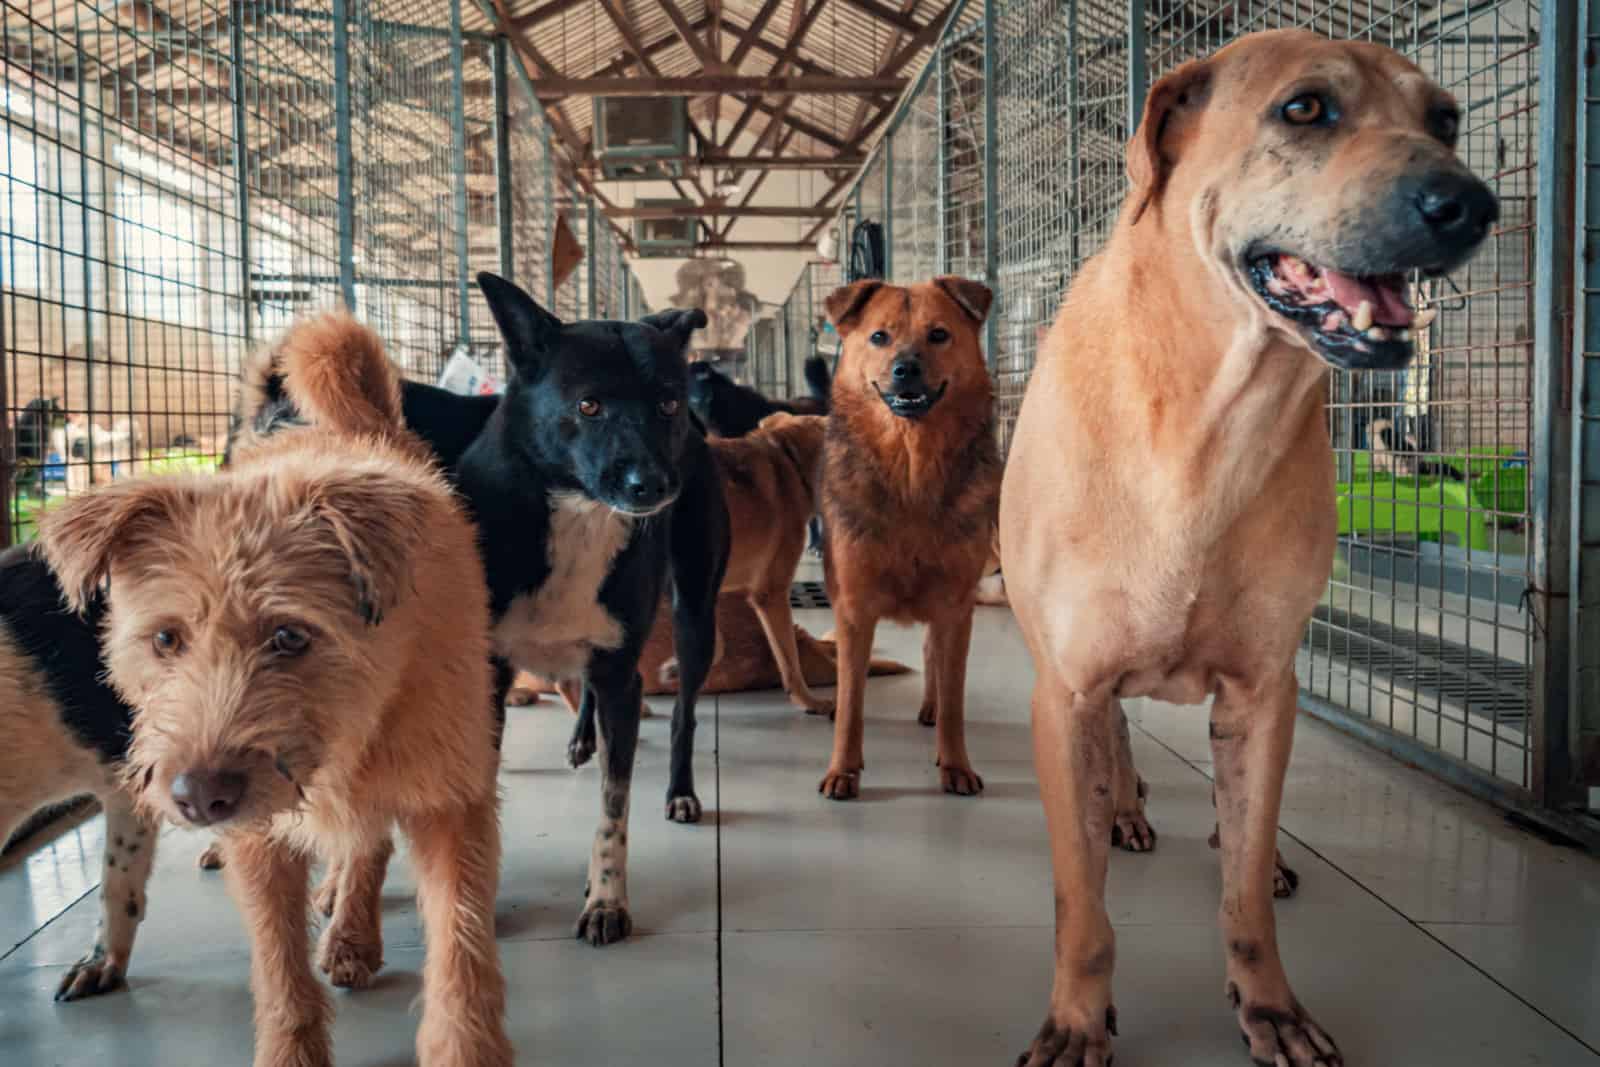 homeless dogs of different breeds in animal shelter.